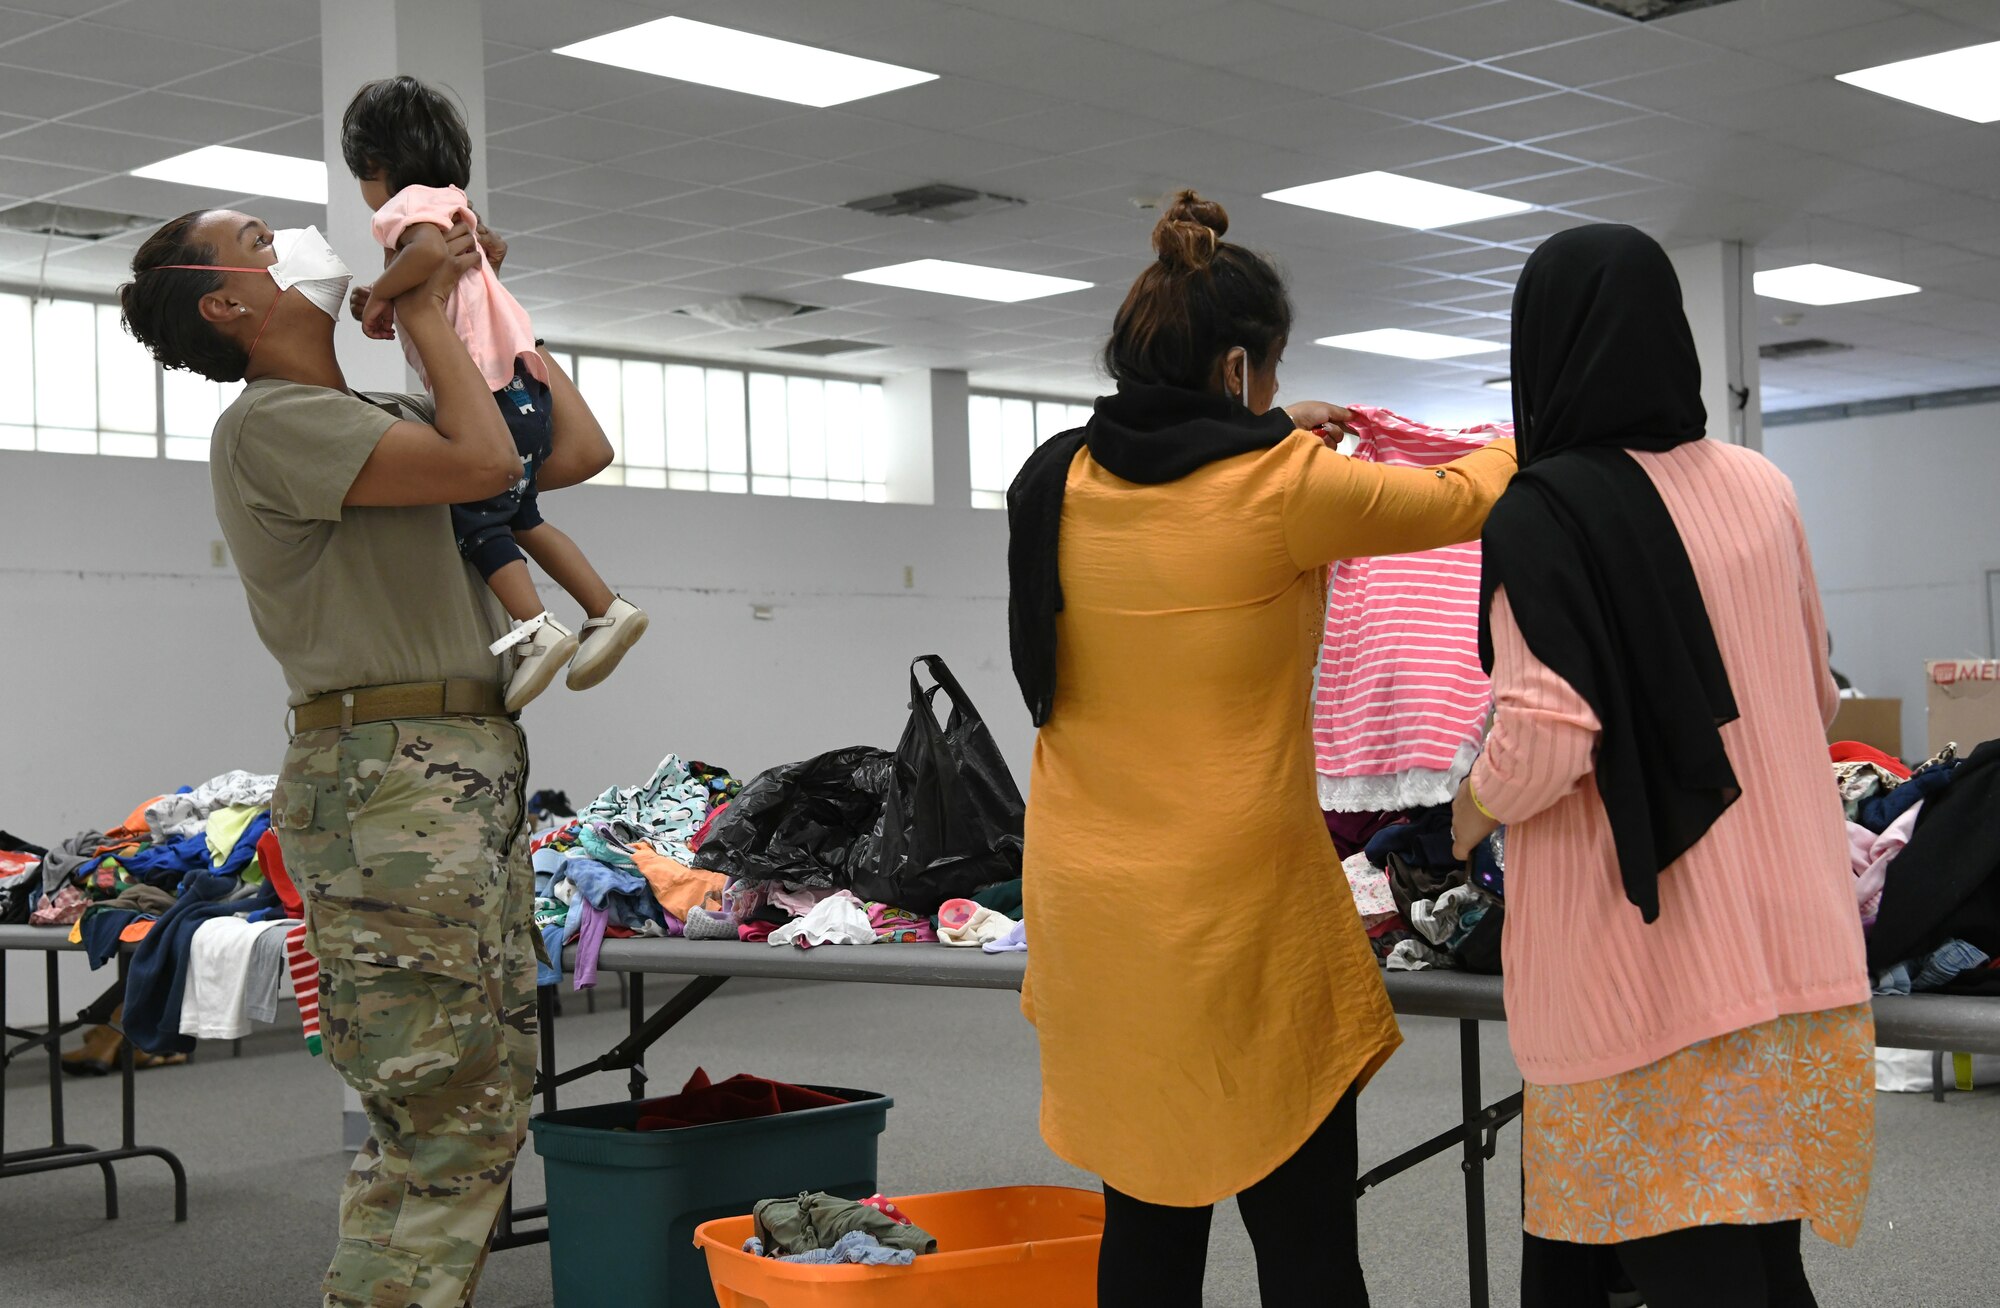 U.S. Air Force Senior Airman Sarina Crowder, Task Force Liberty personnel from 4th Medical Group at Seymour Johnson Air Force Base, North Carolina, holds a young Afghan girl while her mother looks for clothing at Liberty Village on Joint Base McGuire-Dix-Lakehurst, New Jersey, Sept. 2, 2021. The Department of Defense, through U.S. Northern Command, and in support of the Department of Homeland Security, is providing transportation, temporary housing, medical screening, and general support for at least 50,000 Afghan evacuees at suitable facilities, in permanent or temporary structures, as quickly as possible. This initiative provides Afghan personnel essential support at secure locations outside Afghanistan. (National Guard photo by Master Sgt. John Hughel, Washington Air National Guard)